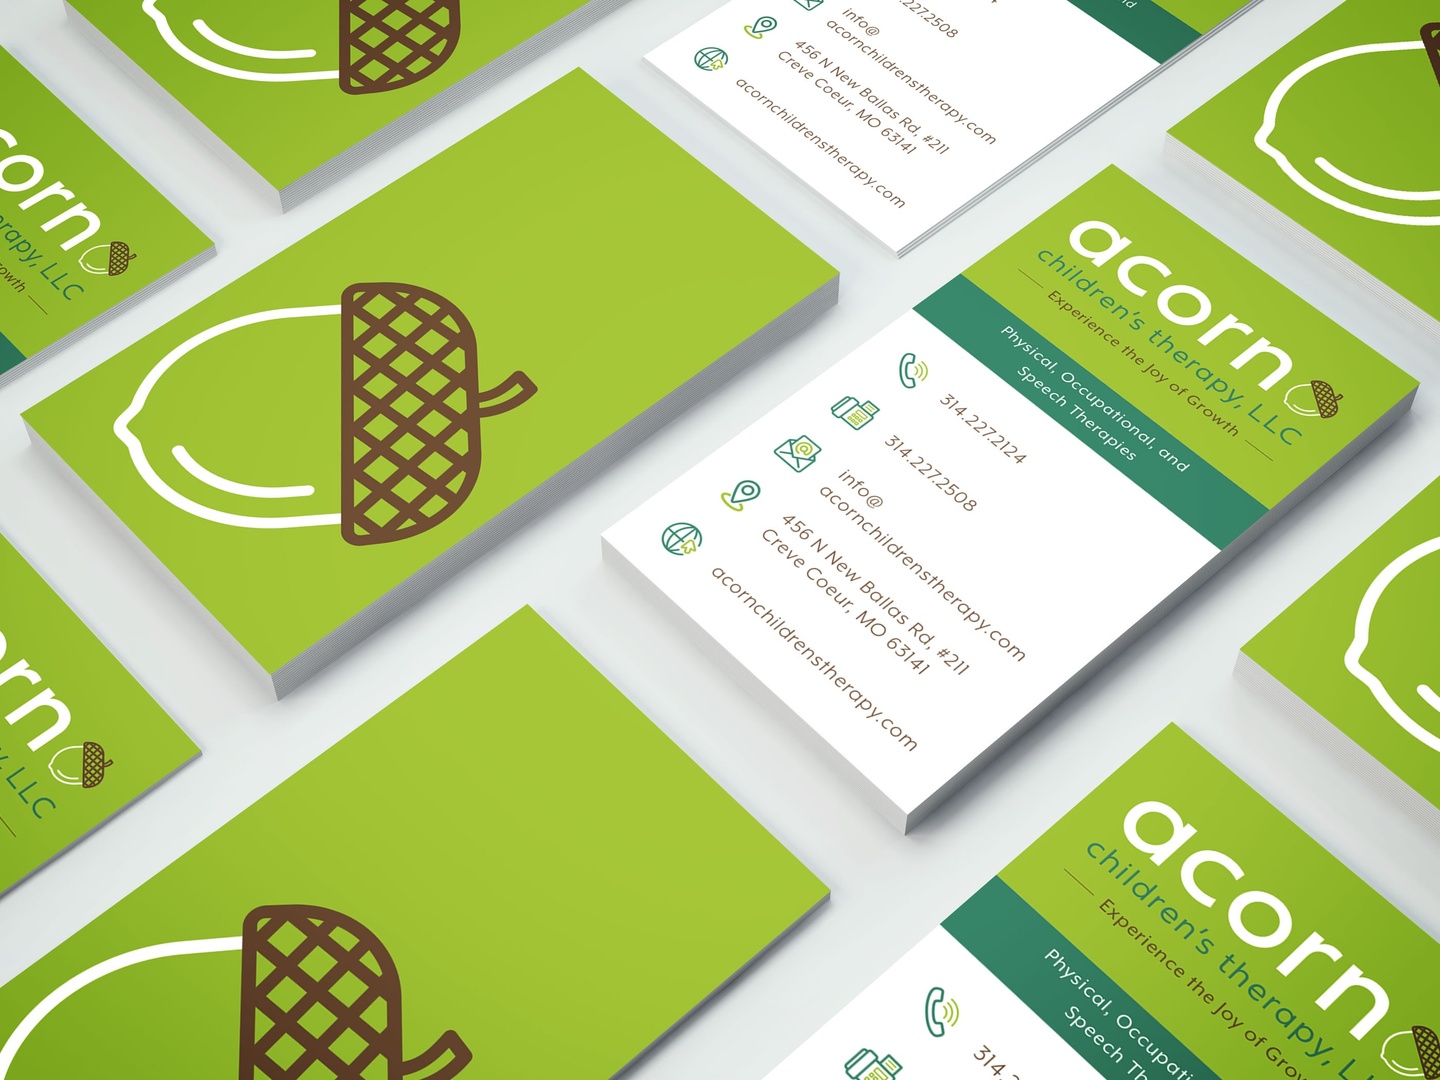 Series of business cards with lime green backs with drawing of an acorn in white and brown; the front side says acorn with additional info.